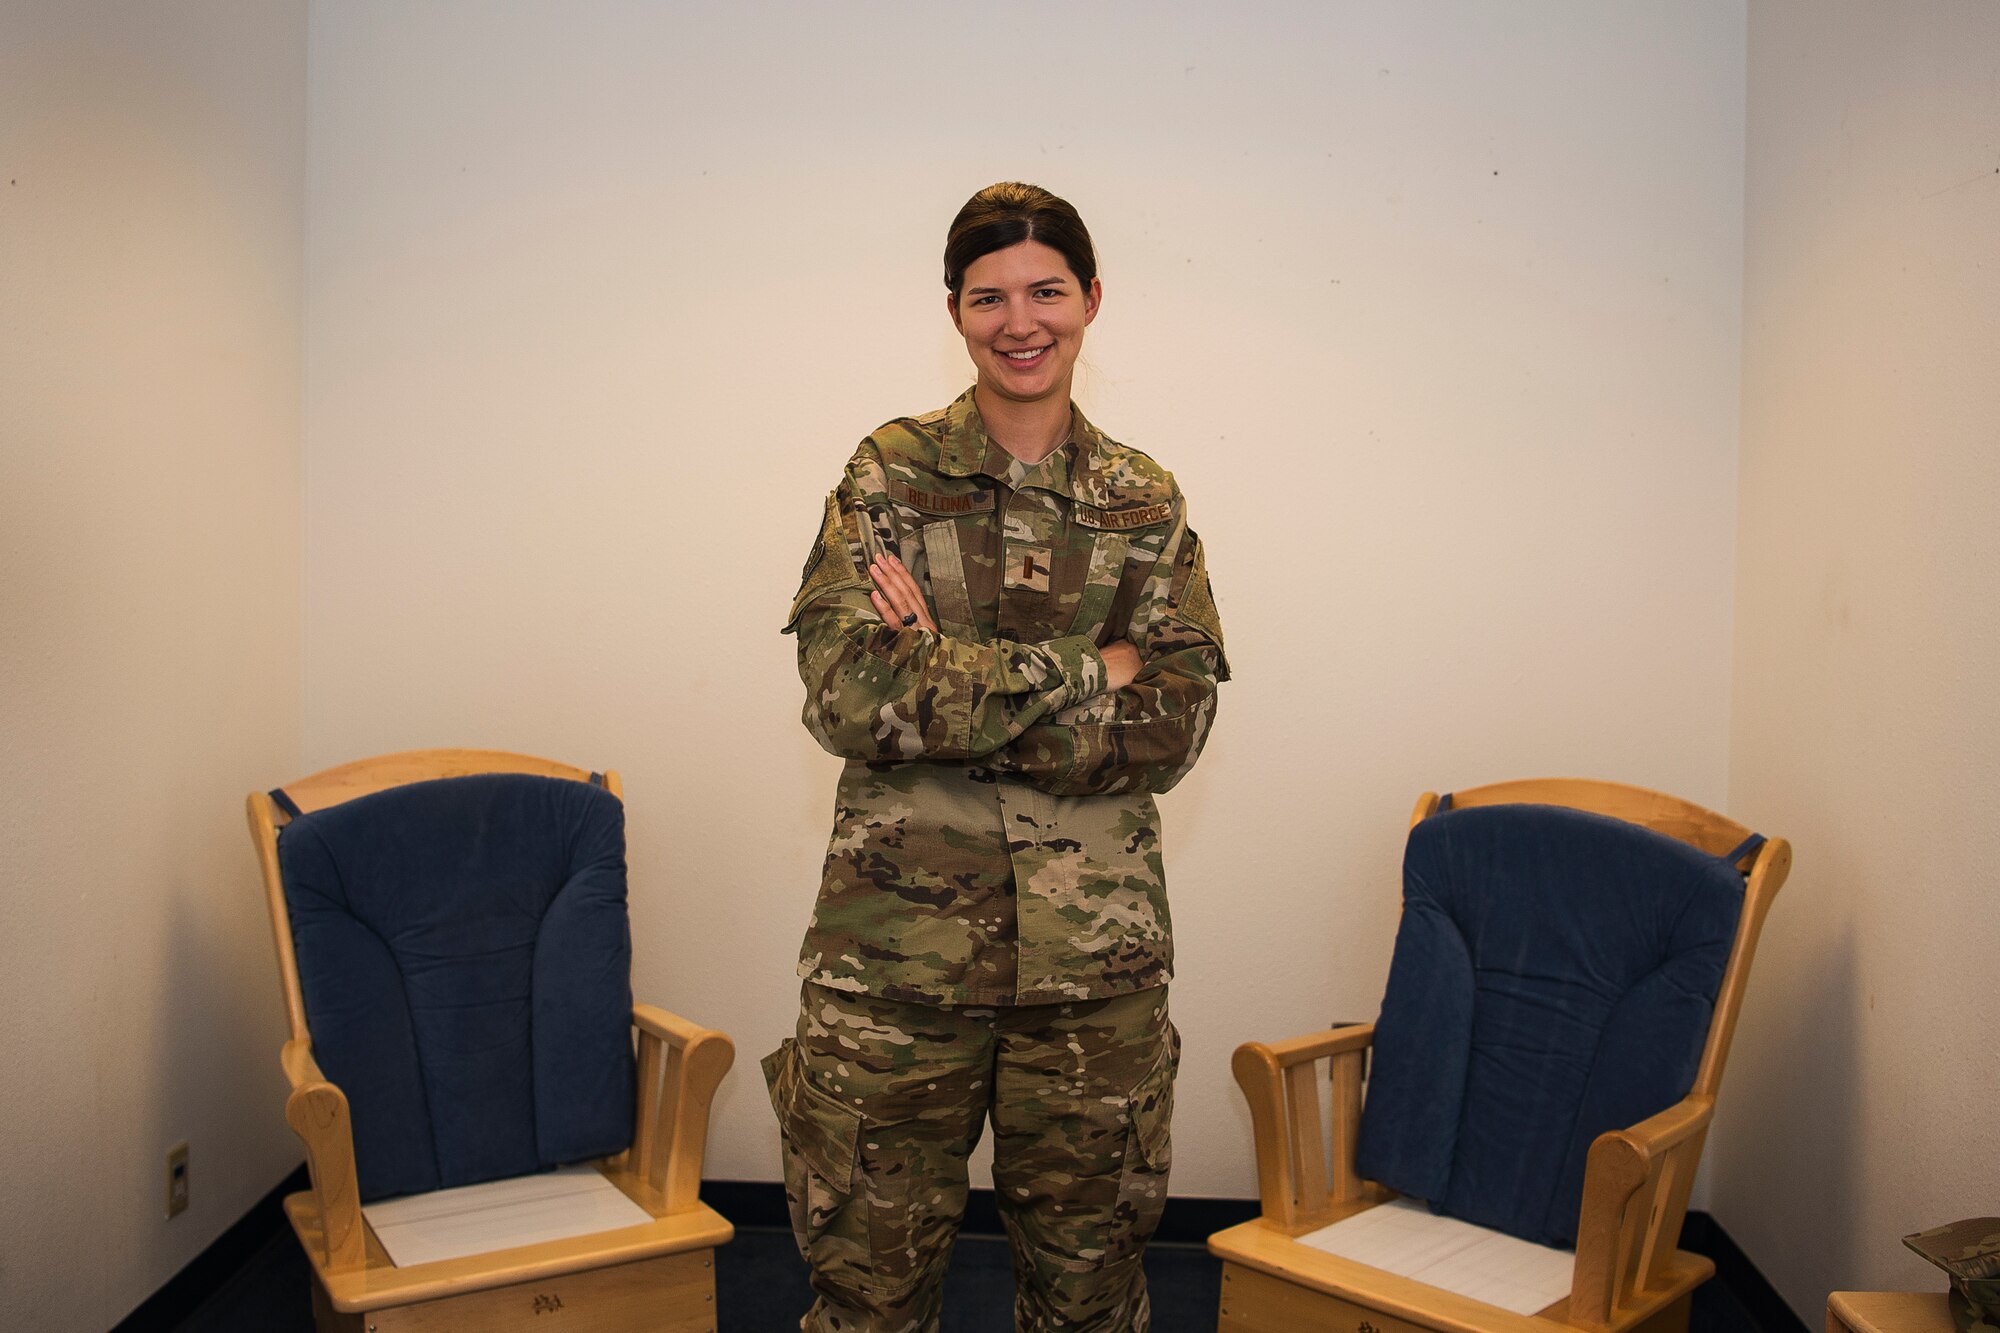 Second Lieutenant Kayla Bellona, 27 Special Operations Wing Public Affairs officer, stands in the newly opened Mother's Room at Cannon Air Force Base, N.M., June 14, 2018. The room was opened to provide mothers with a quiet place to breastfeed their children.